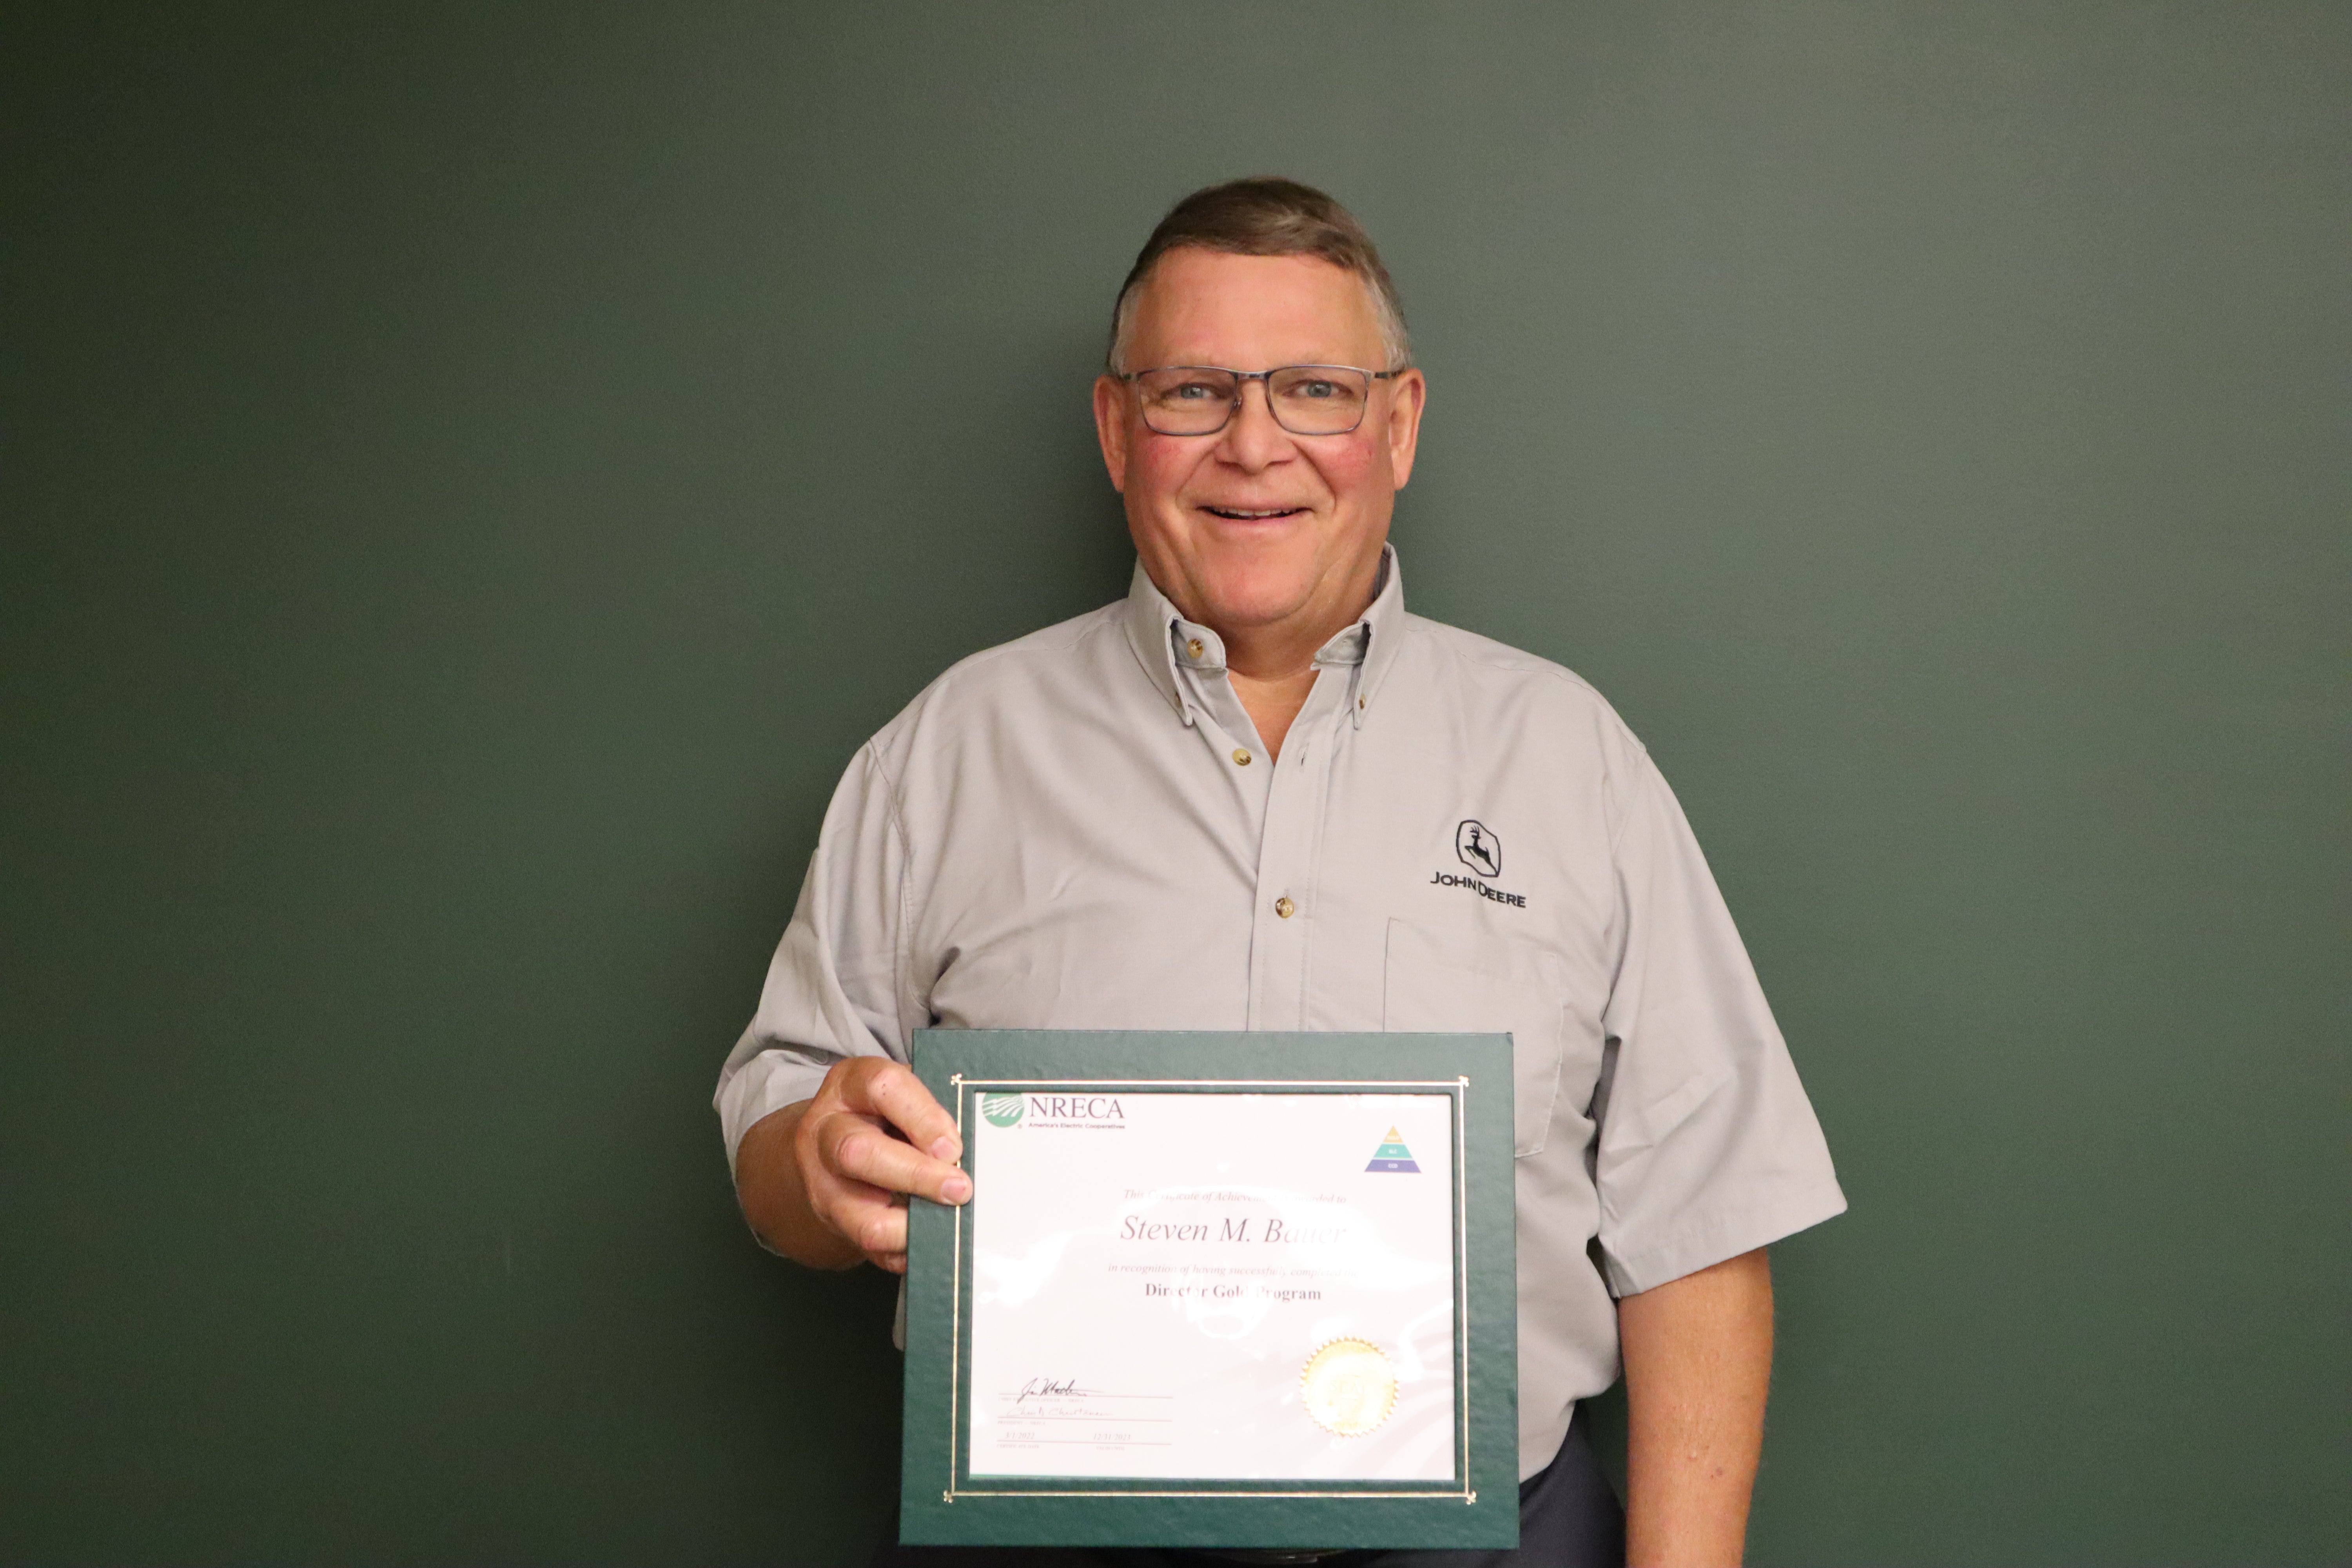 Midwest Electric Board Director Steve Bauer earns his director gold certificate through NRECA